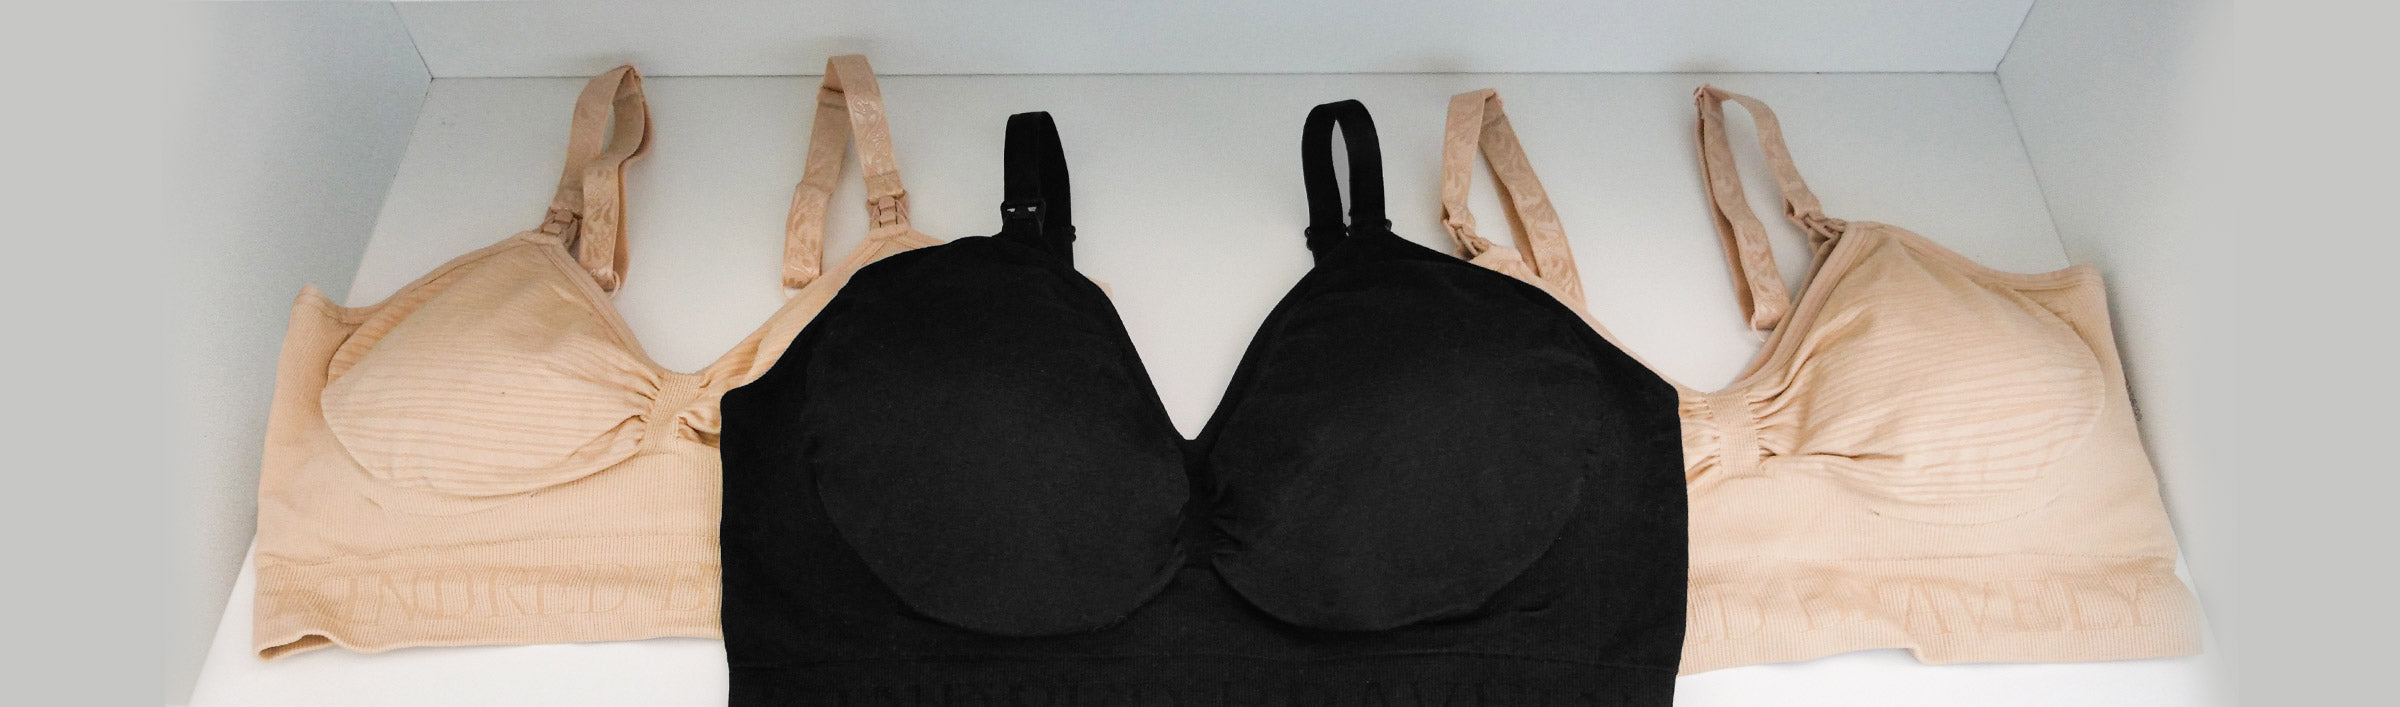 Bra Fitting 101: Here's Why All Parts of A Bra Are Important